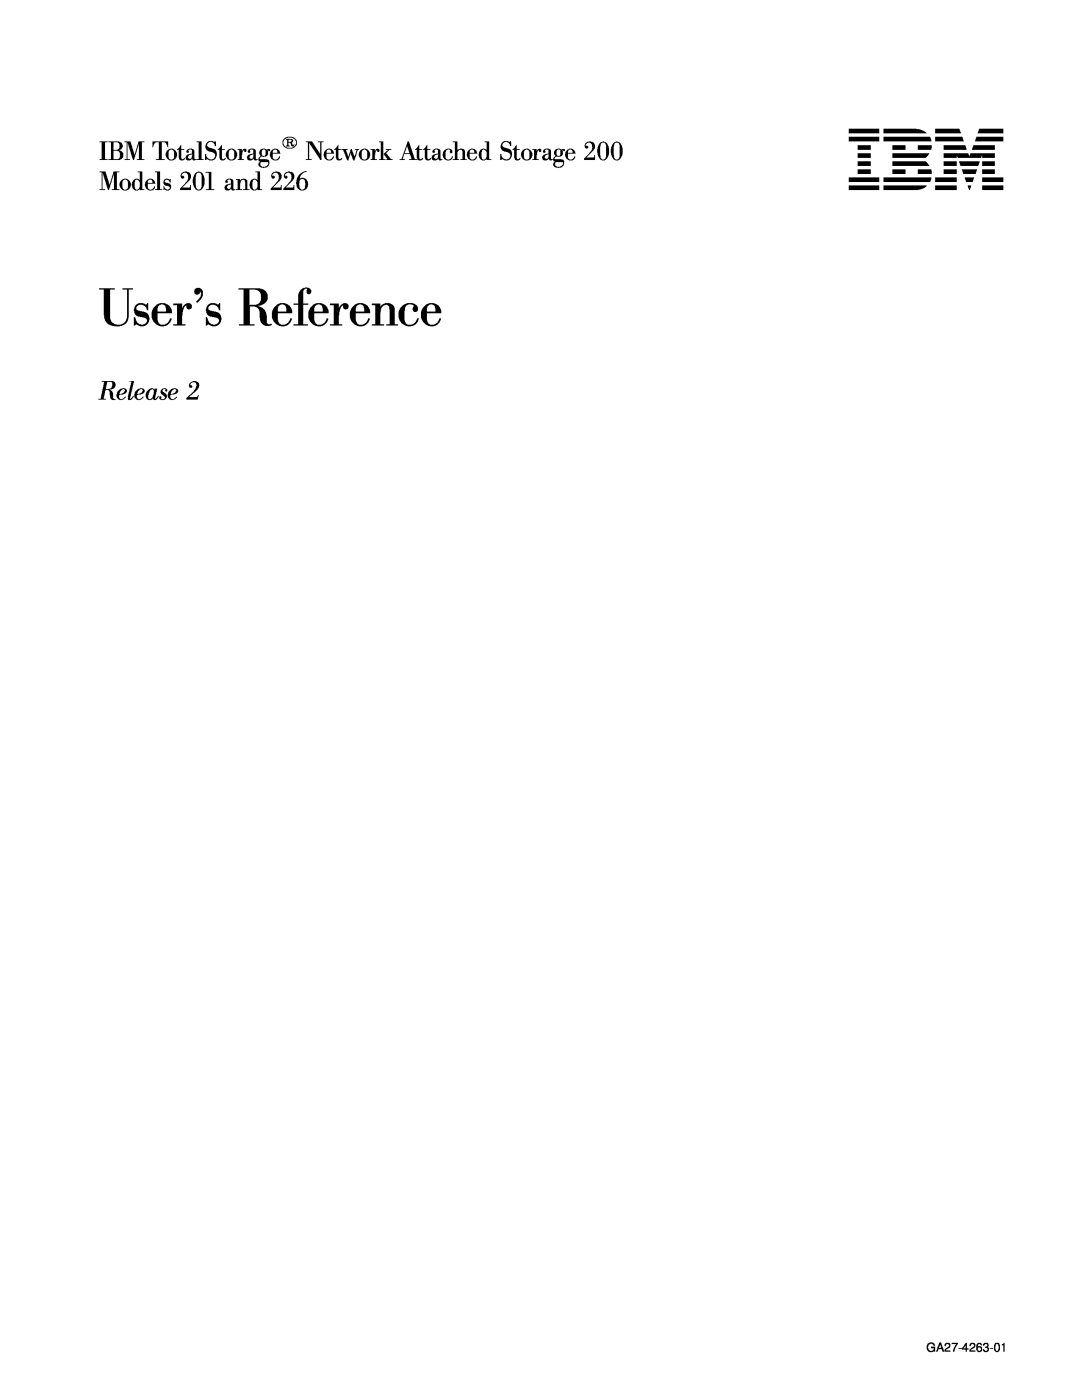 IBM manual User’s Reference, IBM TotalStorage Network Attached Storage, Models 201 and, Release, GA27-4263-01 